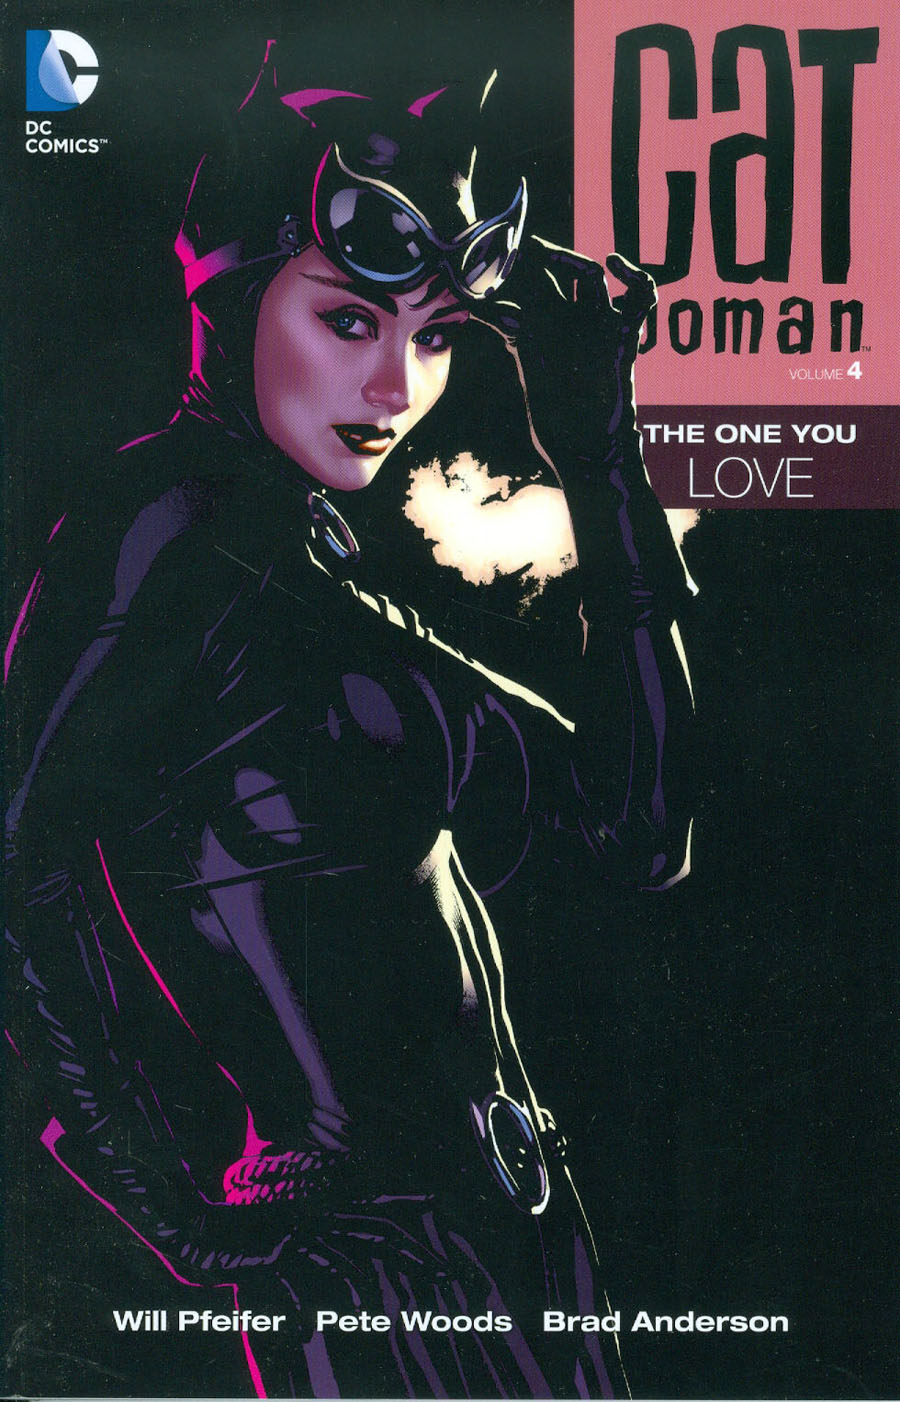 Catwoman Vol 4 The One You Love TP